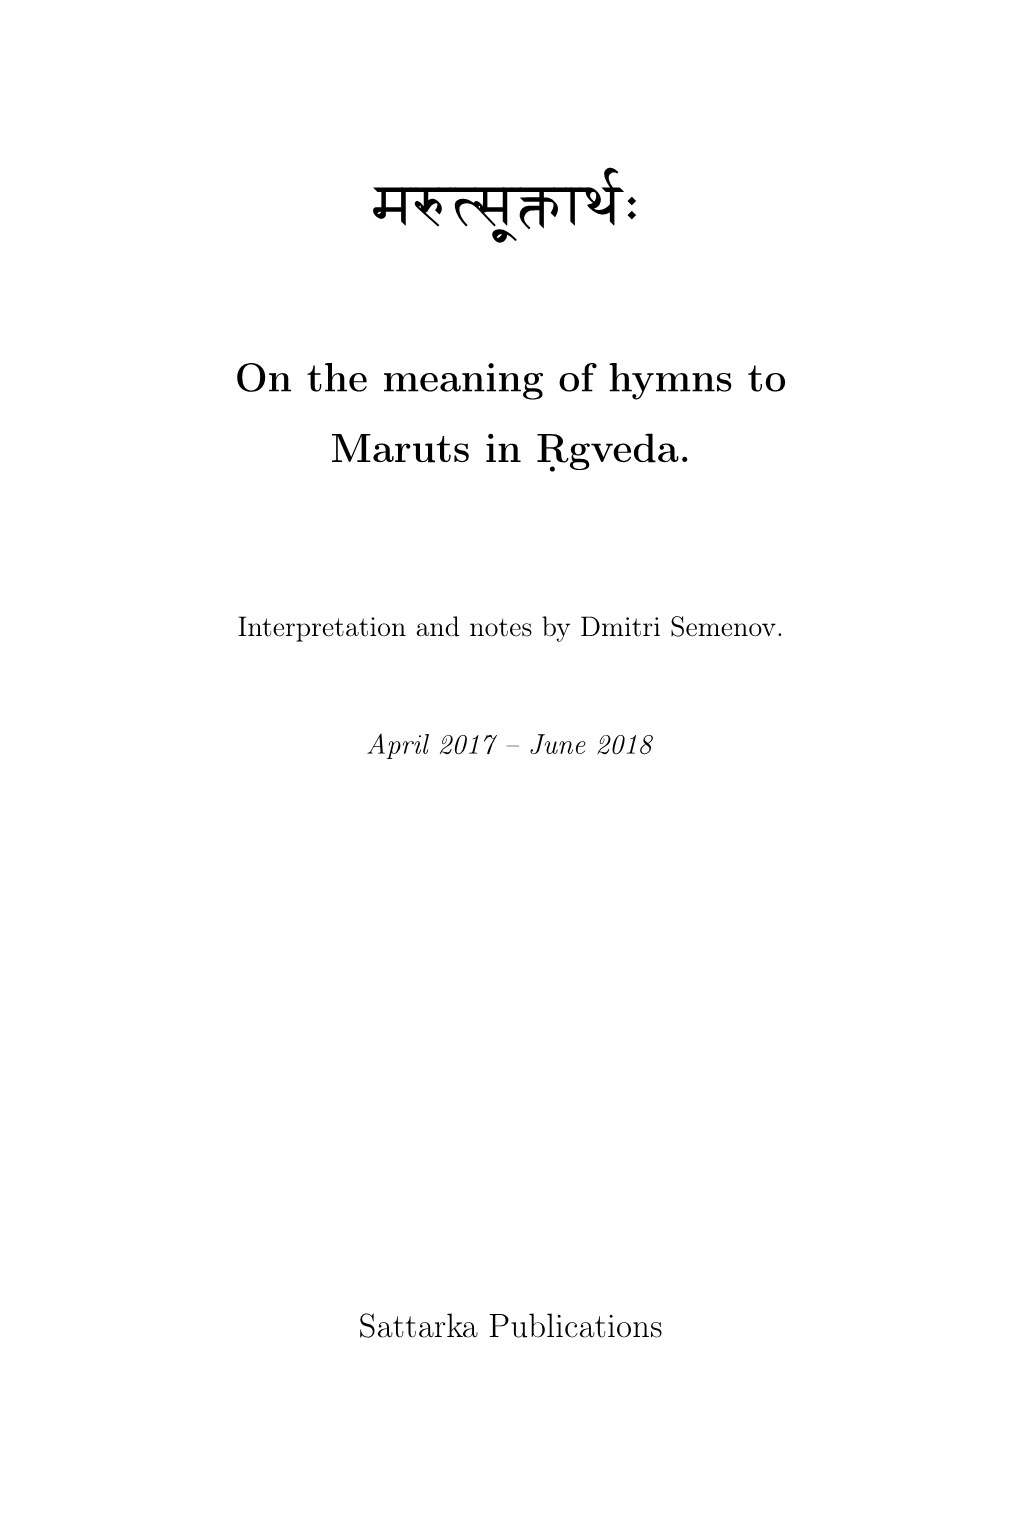 On the Meaning of Hymns to Maruts in R.Gveda